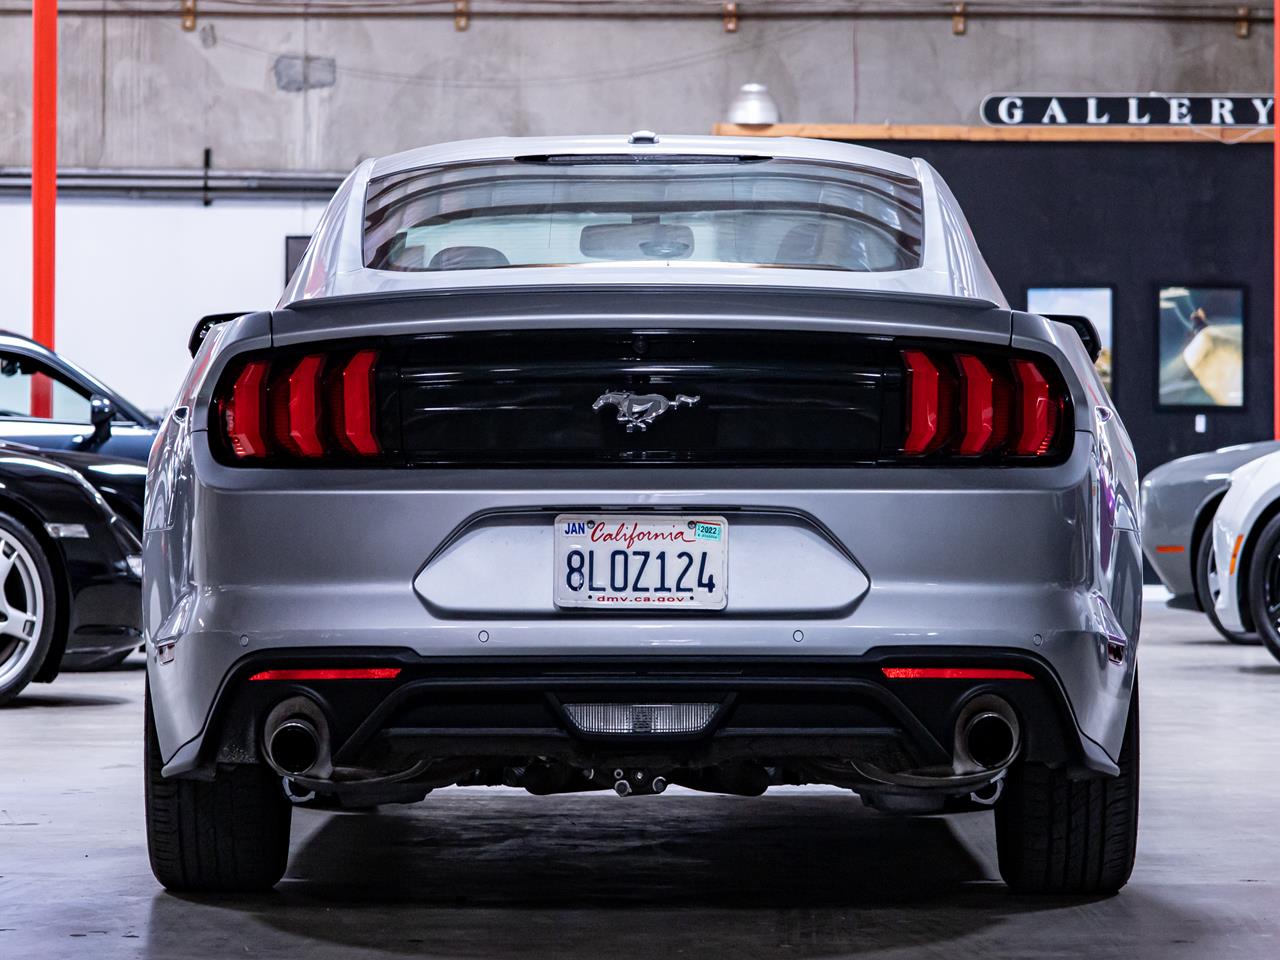  2020 Ford Mustang EcoBoost Car